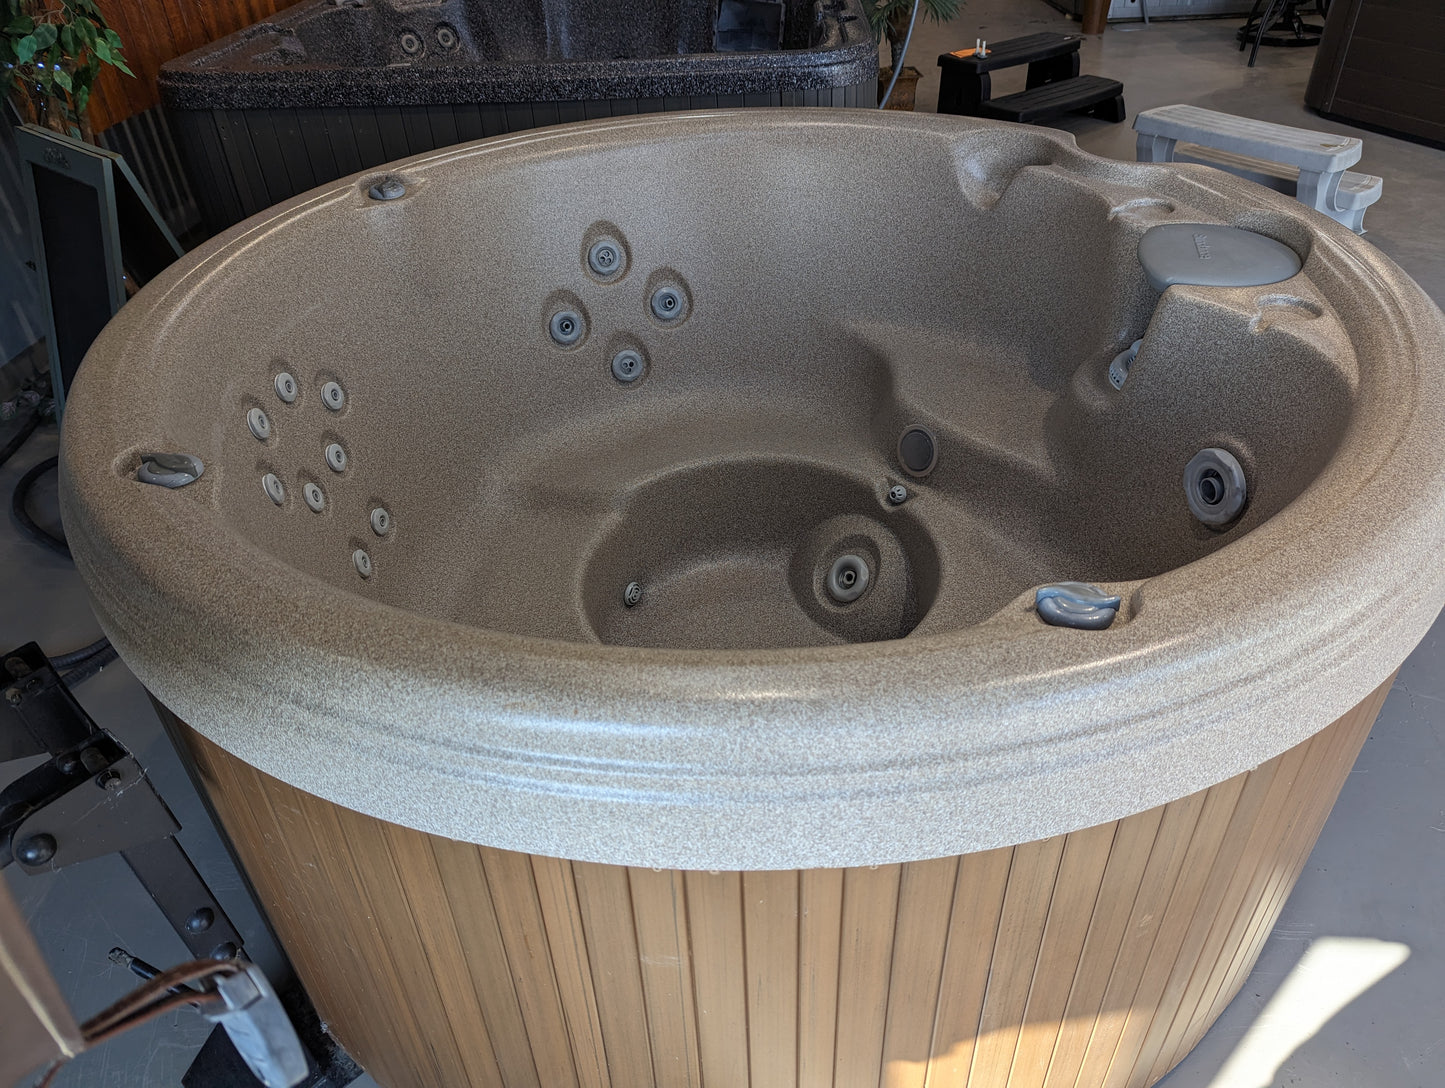 PRE-OWNED Sundance Spa Round Hot Tub